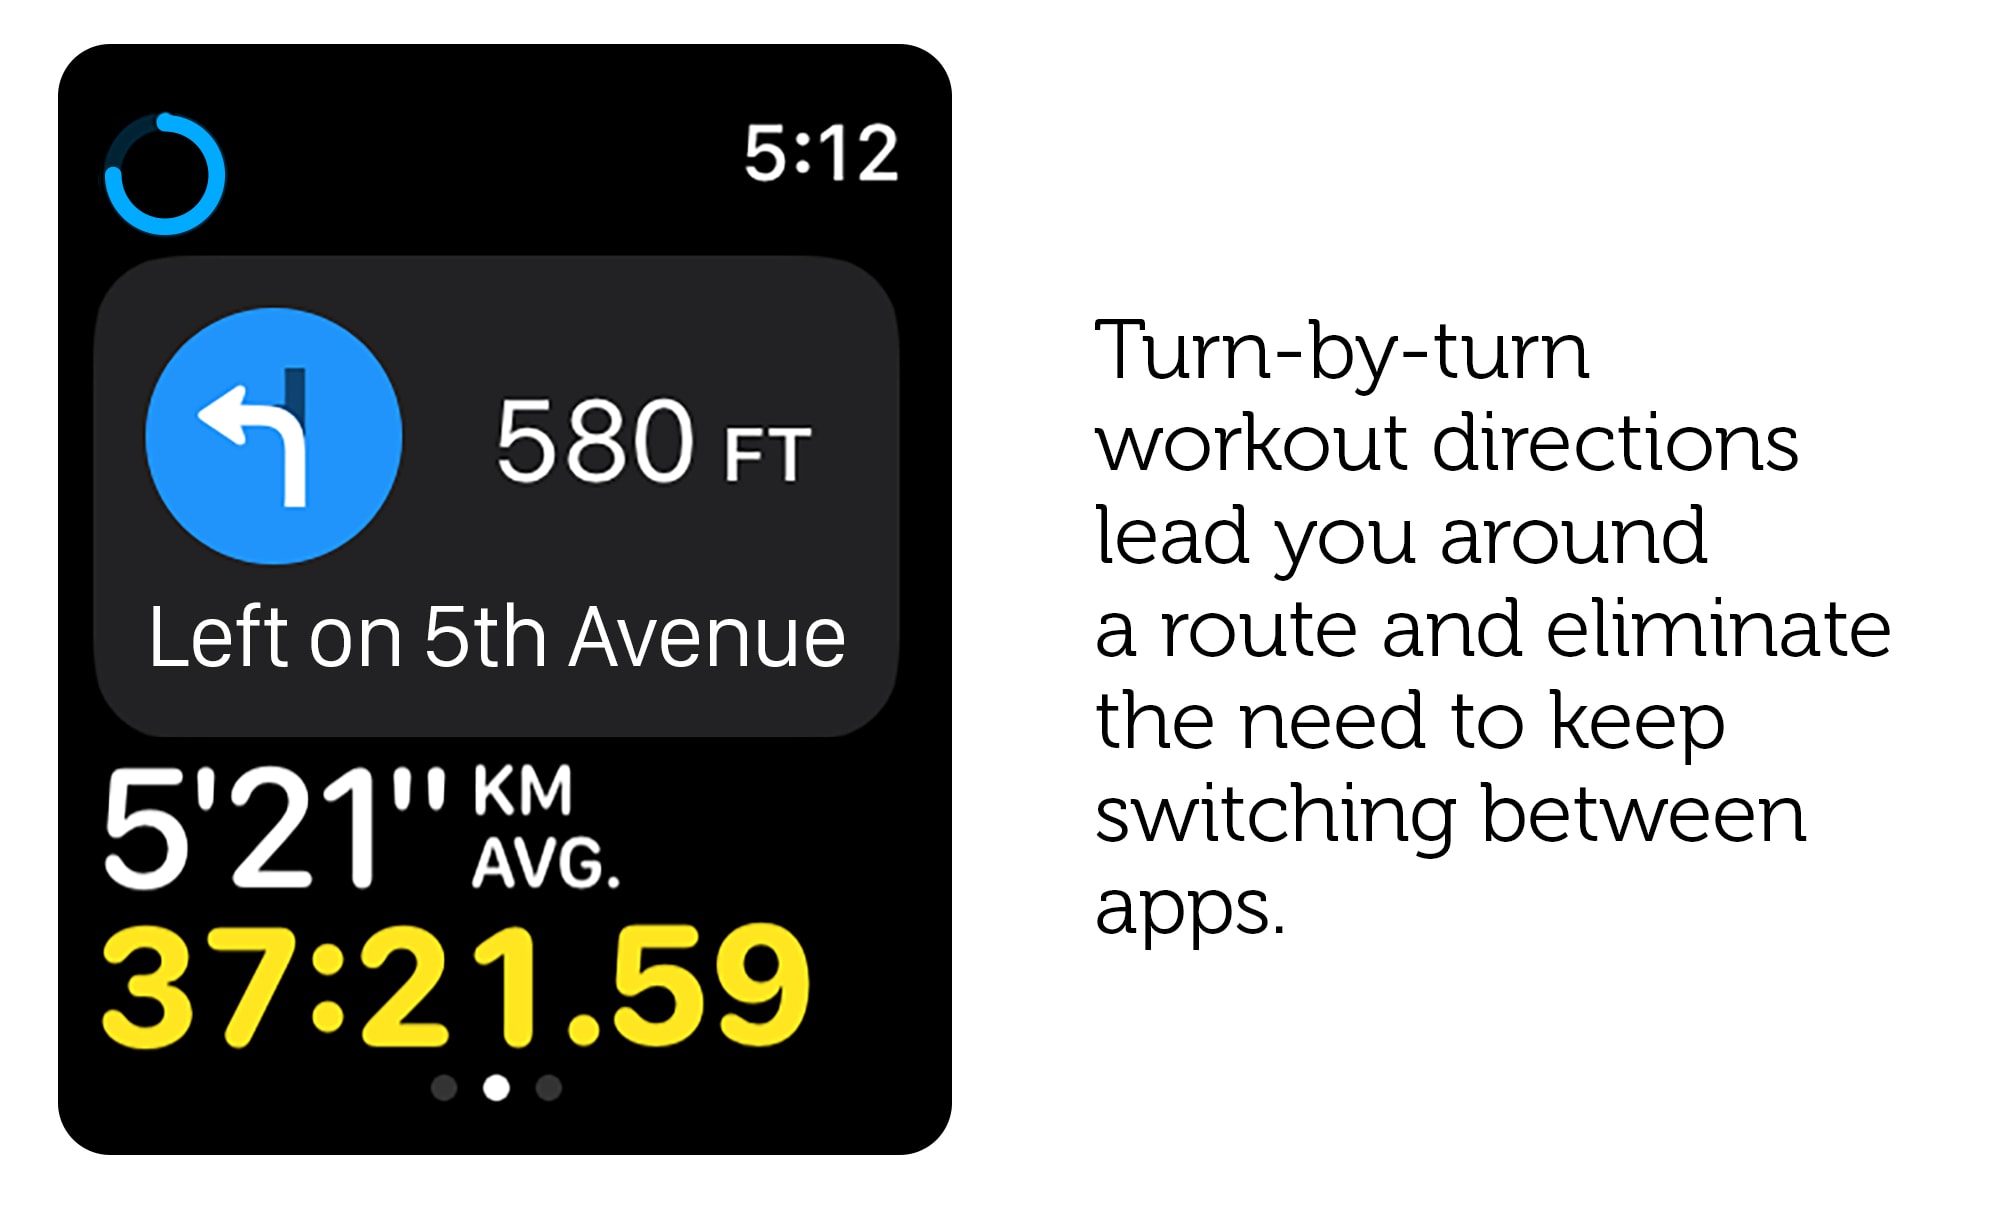 Turn-by-turn directions would be cool in the Workout app